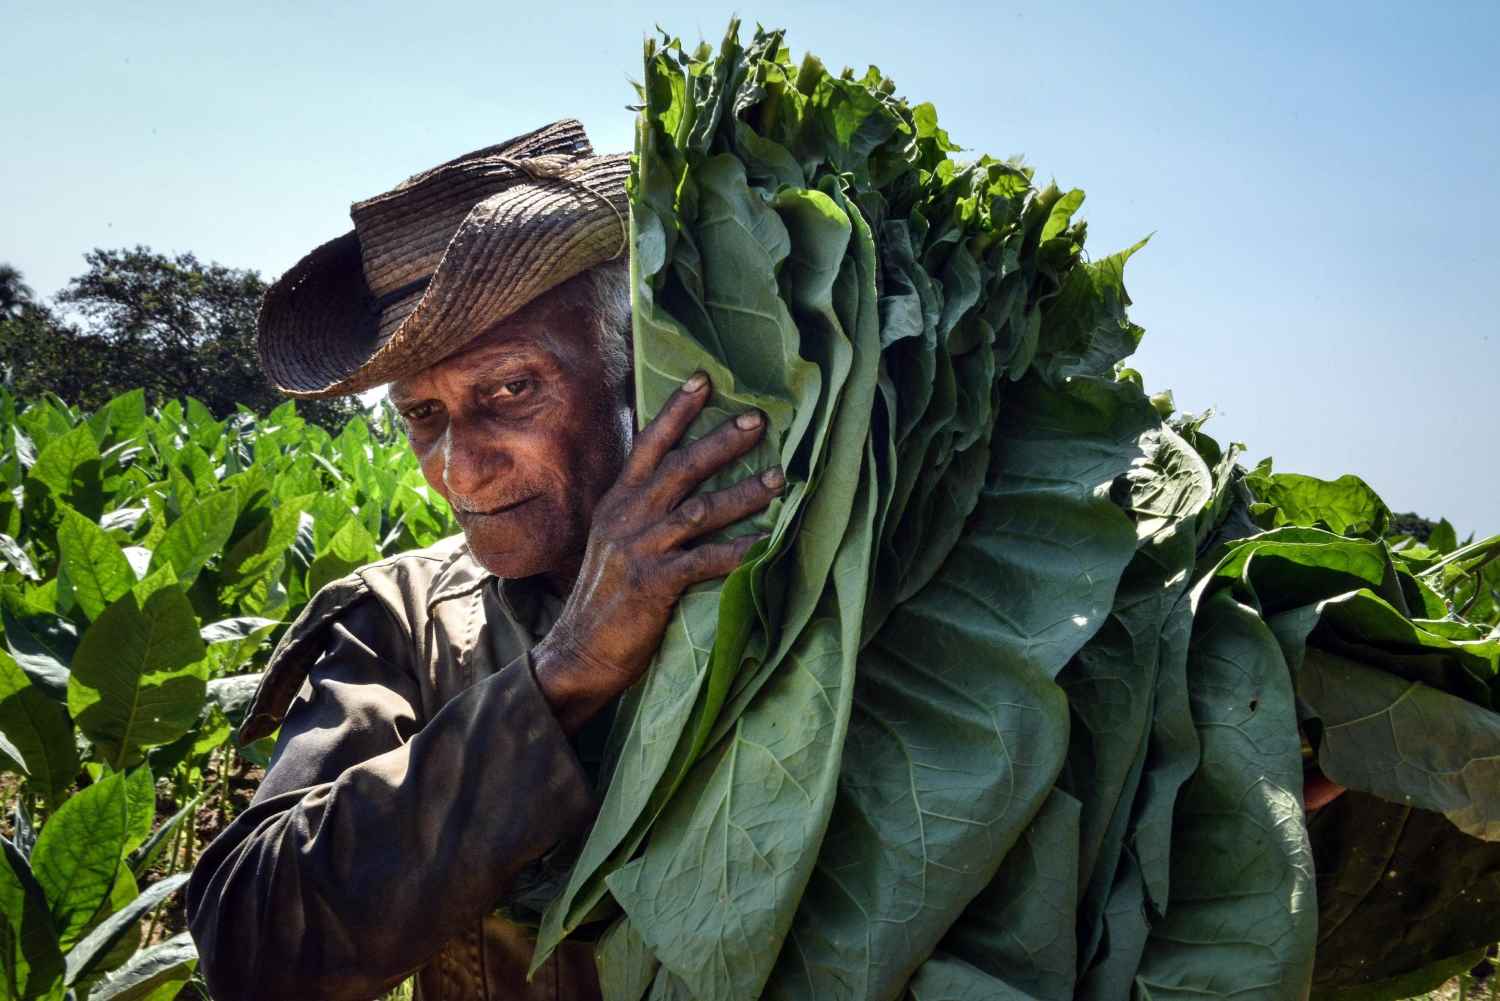 Cuba aims to harvest over 34,000 tons of tobacco in this season